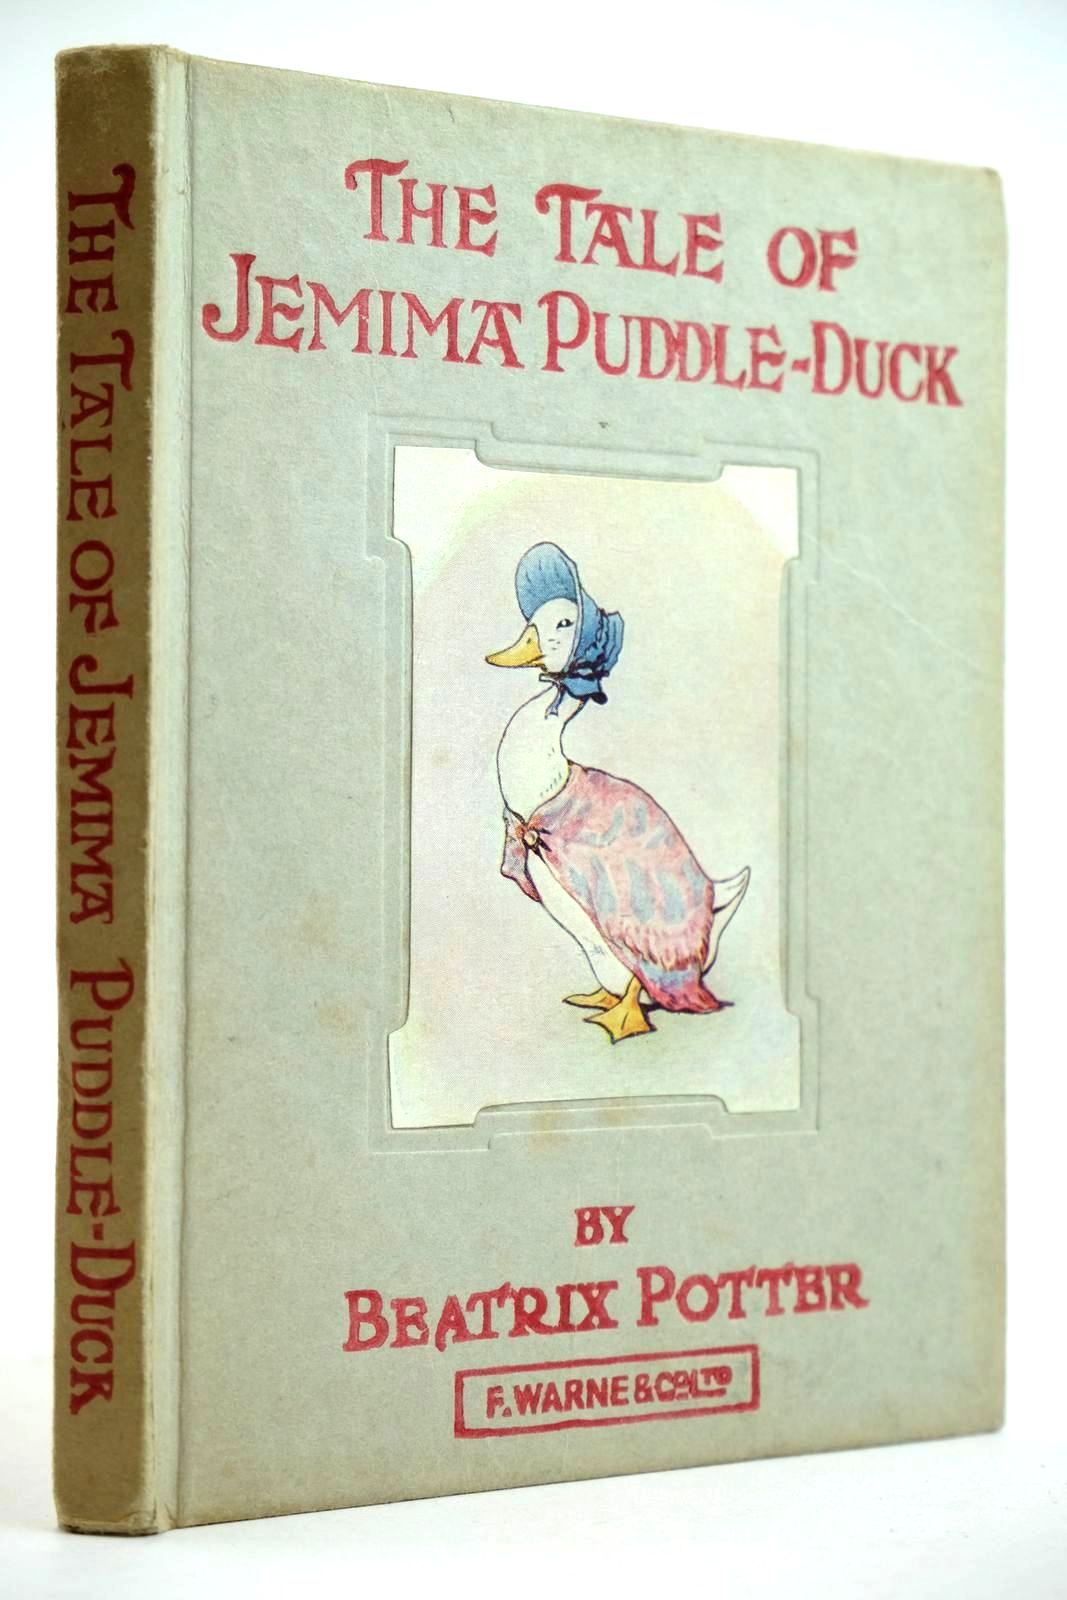 Photo of THE TALE OF JEMIMA PUDDLE-DUCK written by Potter, Beatrix illustrated by Potter, Beatrix published by Frederick Warne &amp; Co Ltd. (STOCK CODE: 2132062)  for sale by Stella & Rose's Books